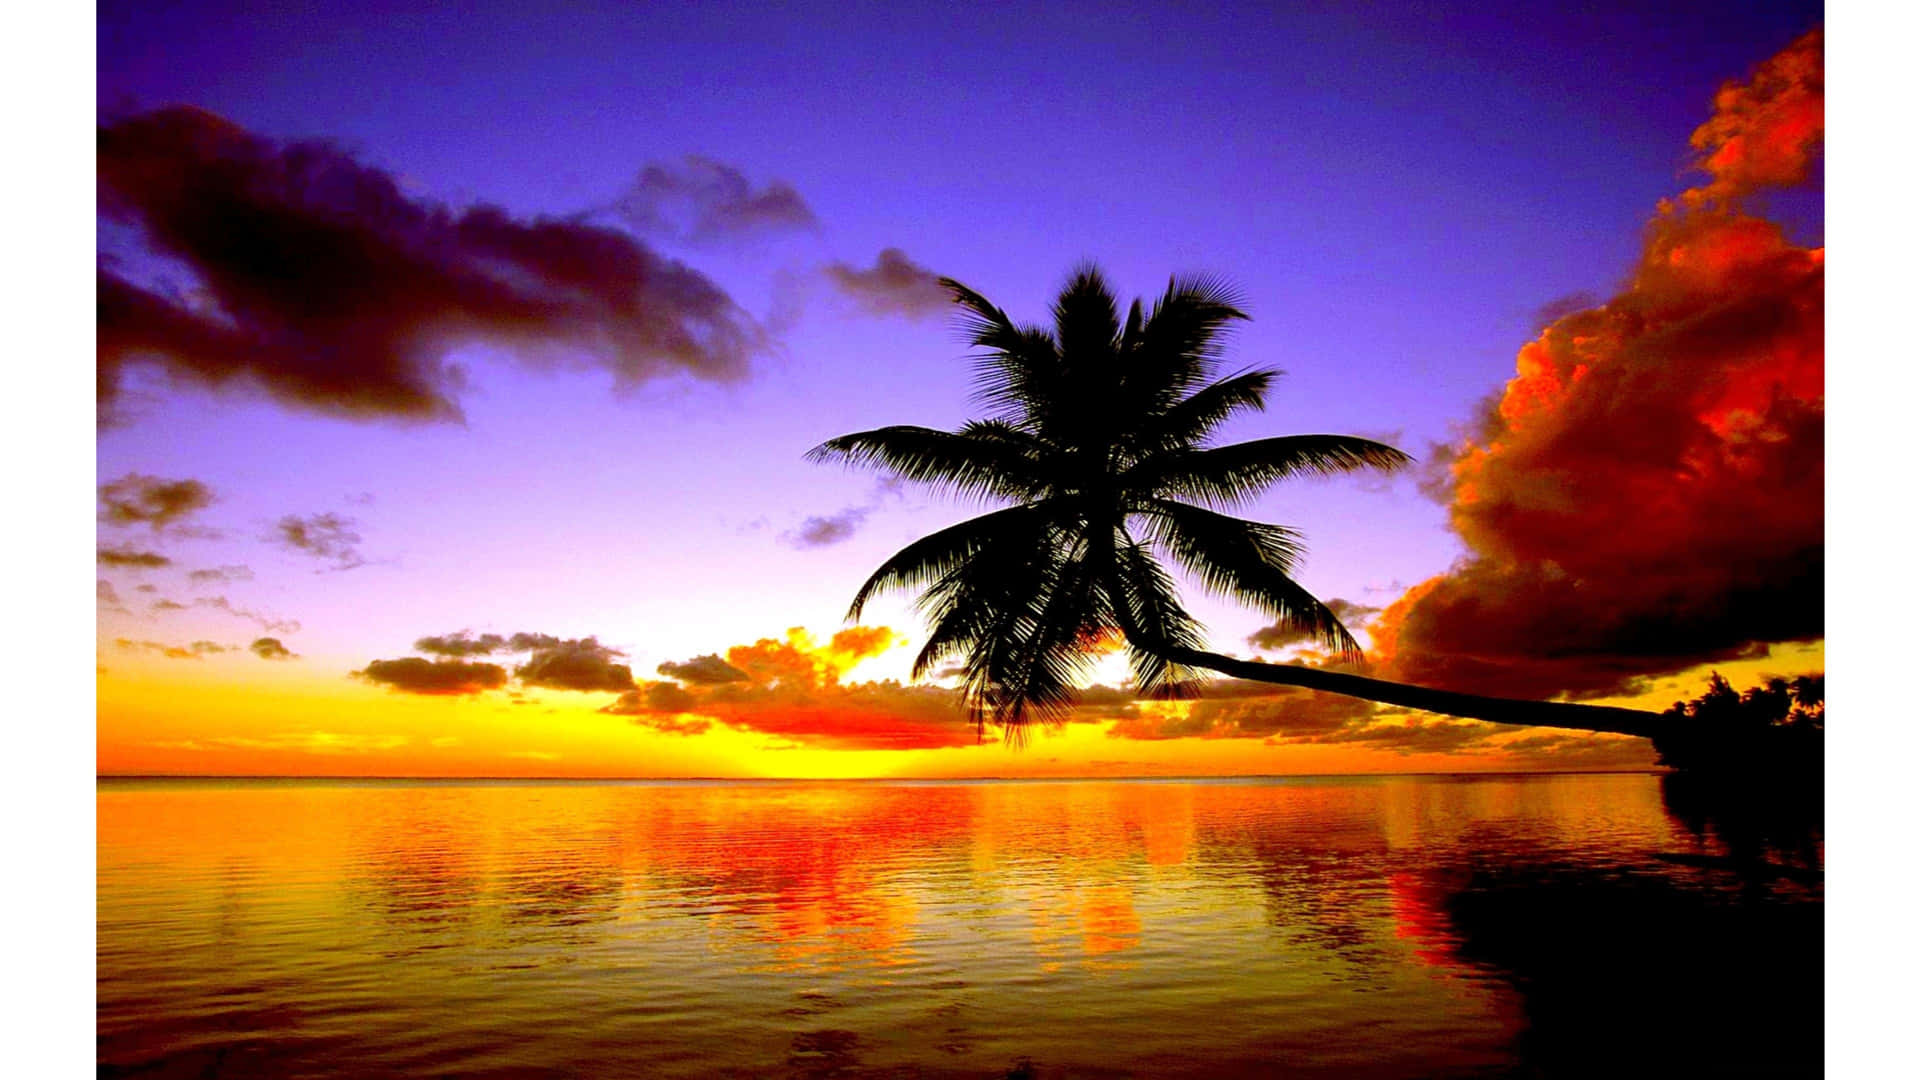 Enjoying a Stunning View Of Paradise with a Palm Tree